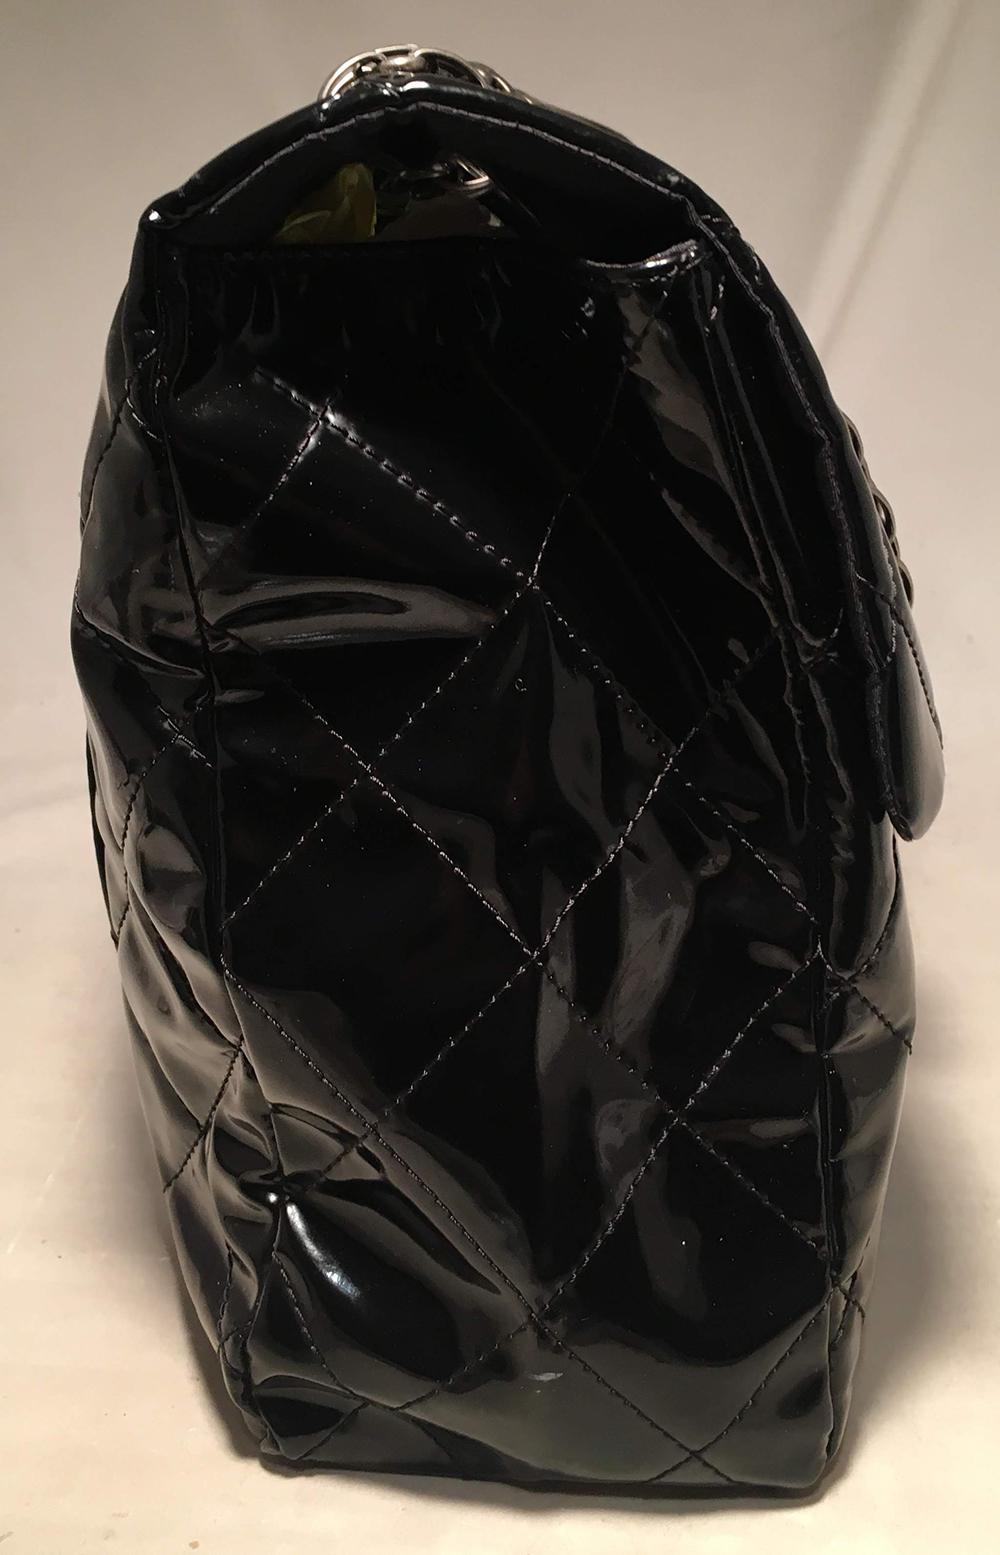 CHANEL black PVC XXL classic shoulder bag tote. Black quilted PVC exterior with gunmetal hardware. Mademoiselle style front closure opens single flap style to a black nylon lined interior that holds 1 zippered, 1 slit, and 1 cell phone pocket and